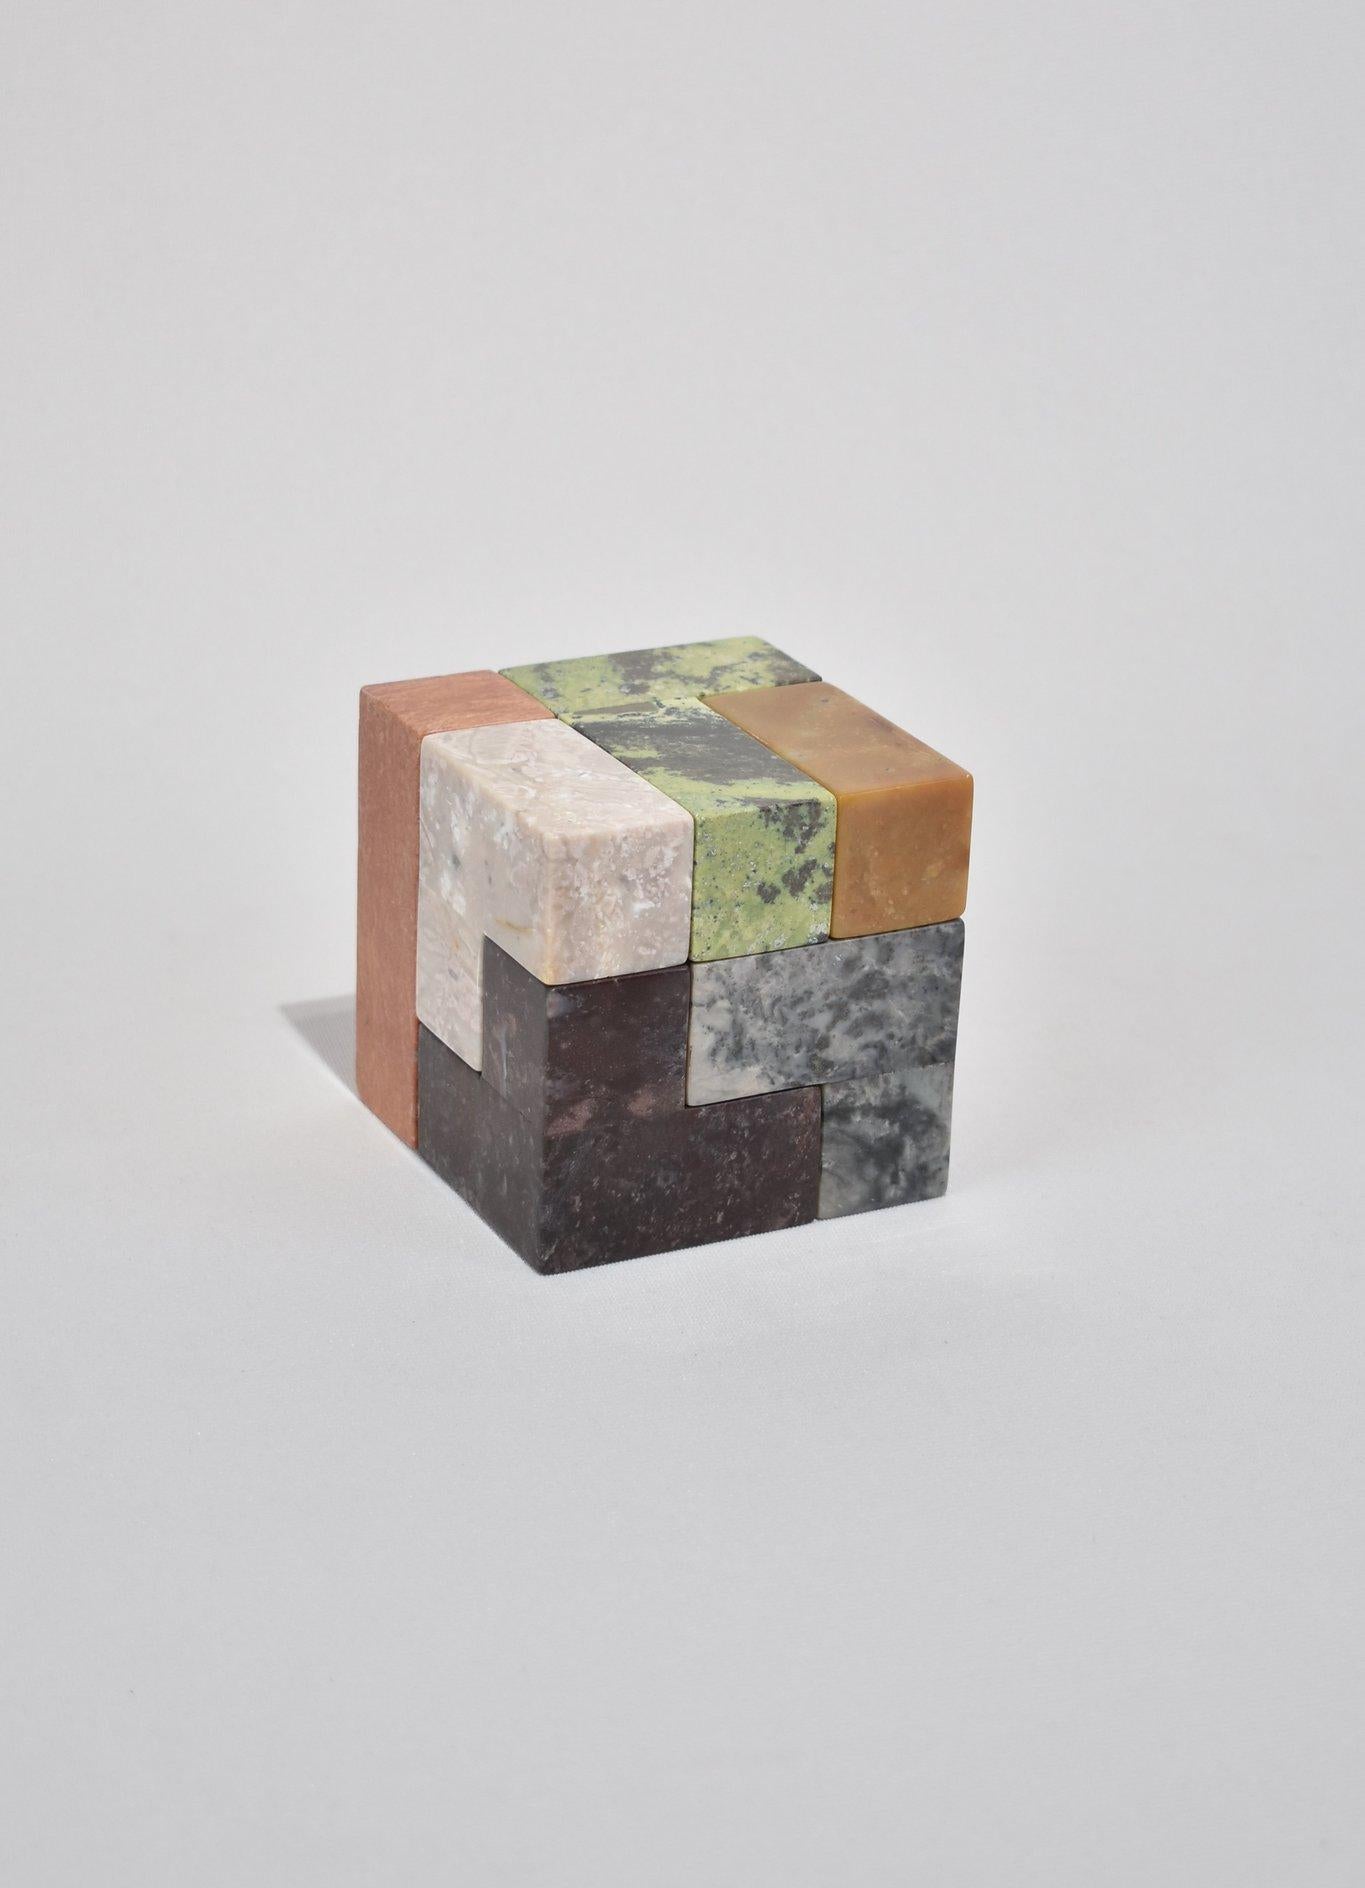 Peruvian Hand-Carved Soma Cube Puzzle Sculpture in Mix Stones